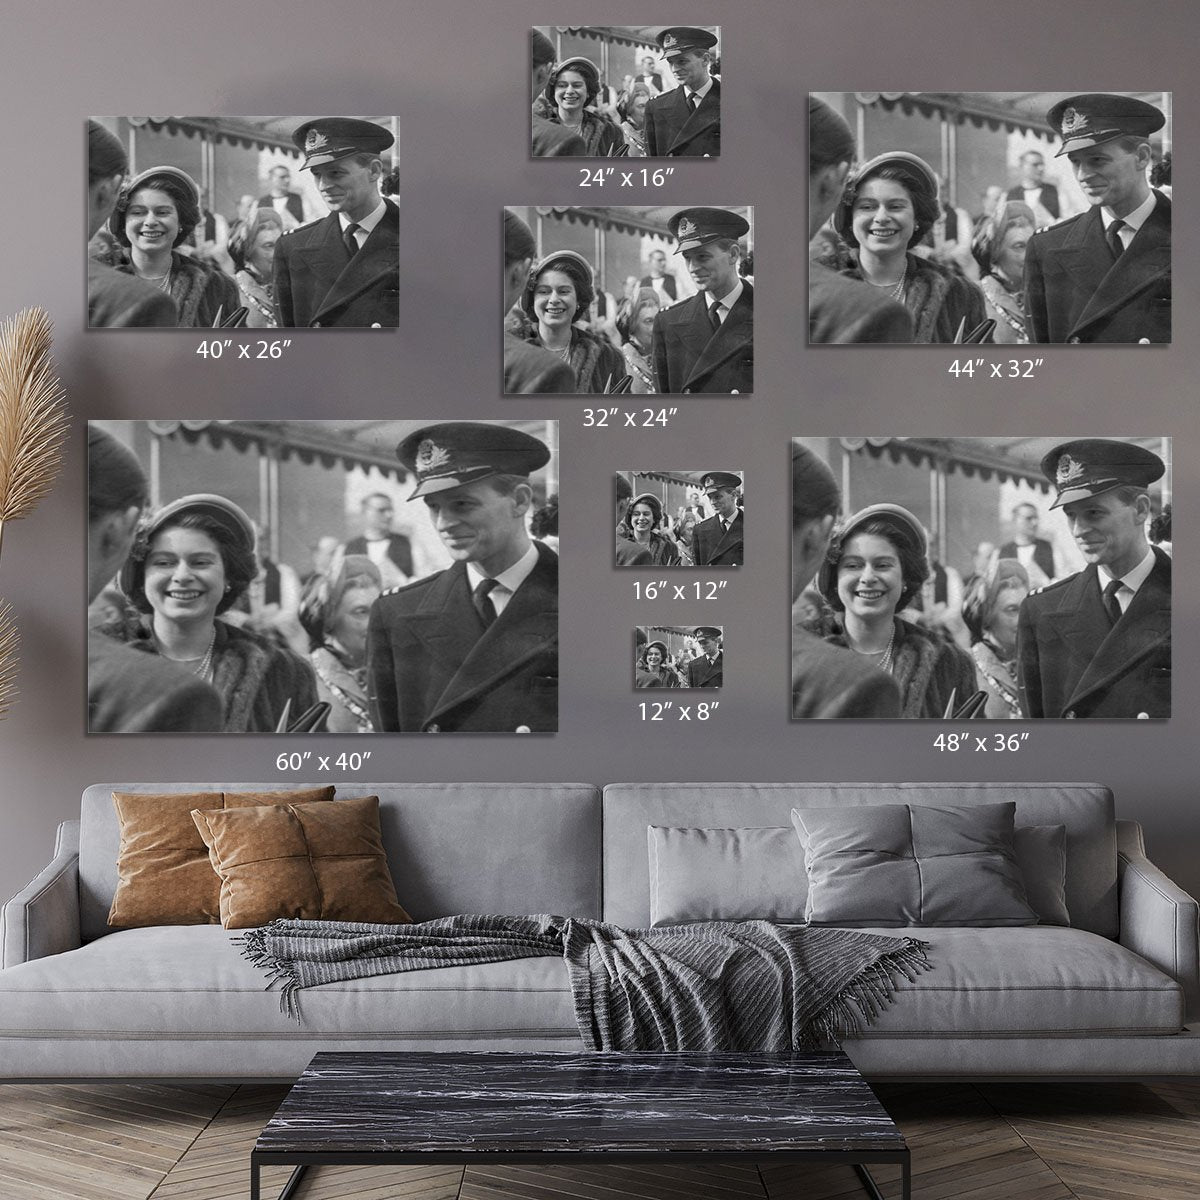 Queen Elizabeth II and Prince Philip touring as young couple Canvas Print or Poster